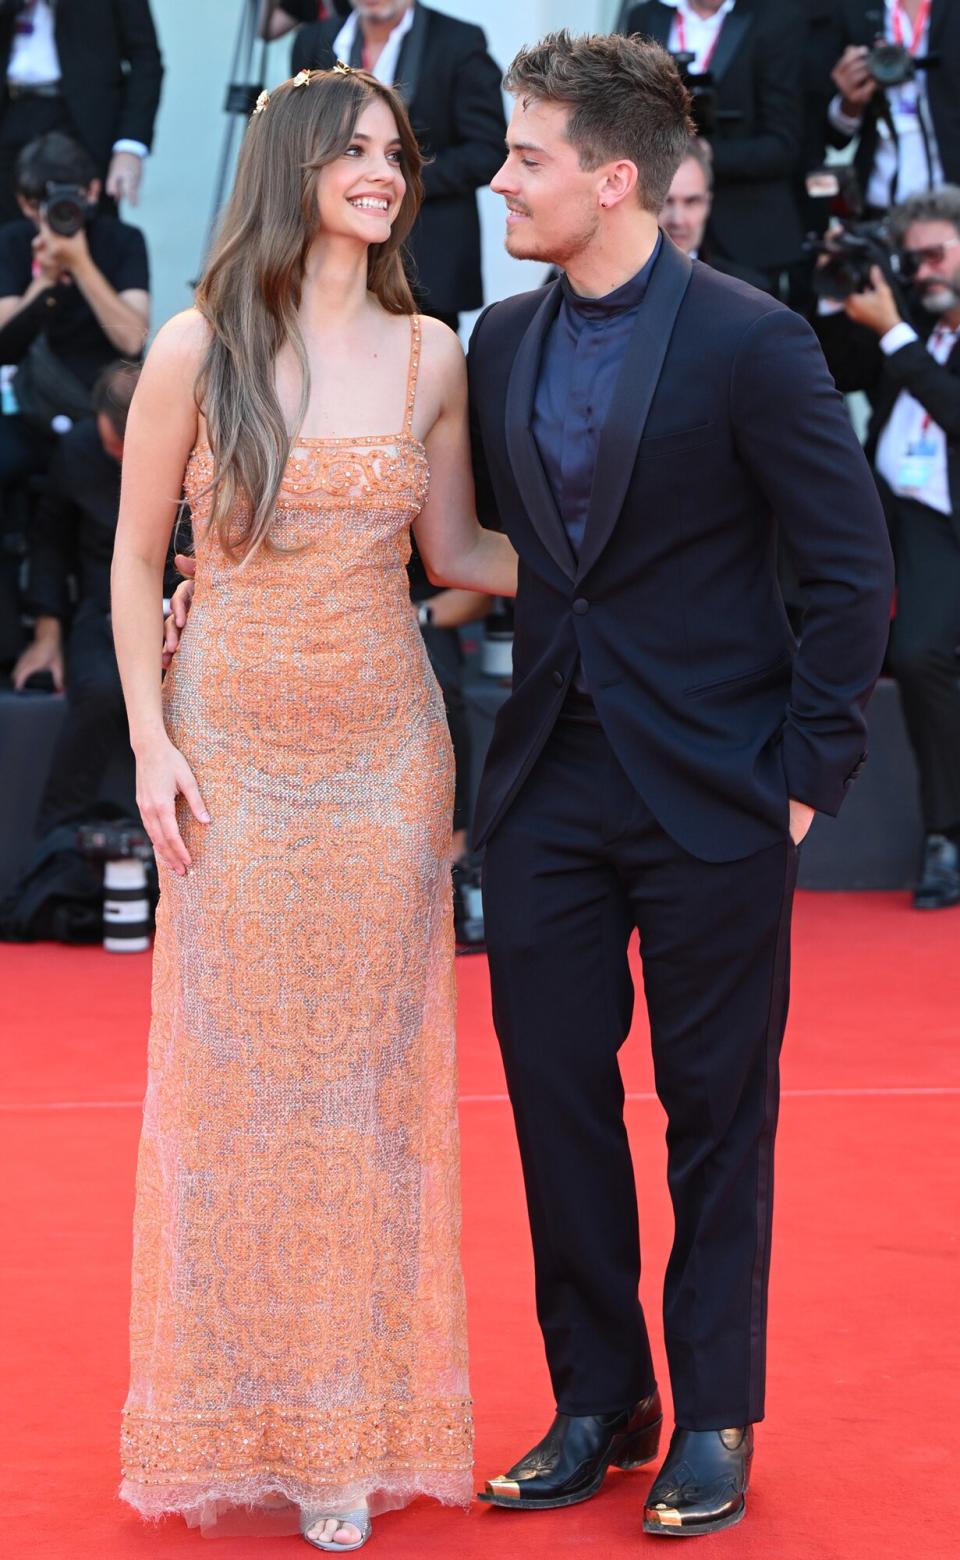 Barbara Palvin and Dylan Sprouse attend the "Bones And All" red carpet at the 79th Venice International Film Festival on September 02, 2022 in Venice, Italy.